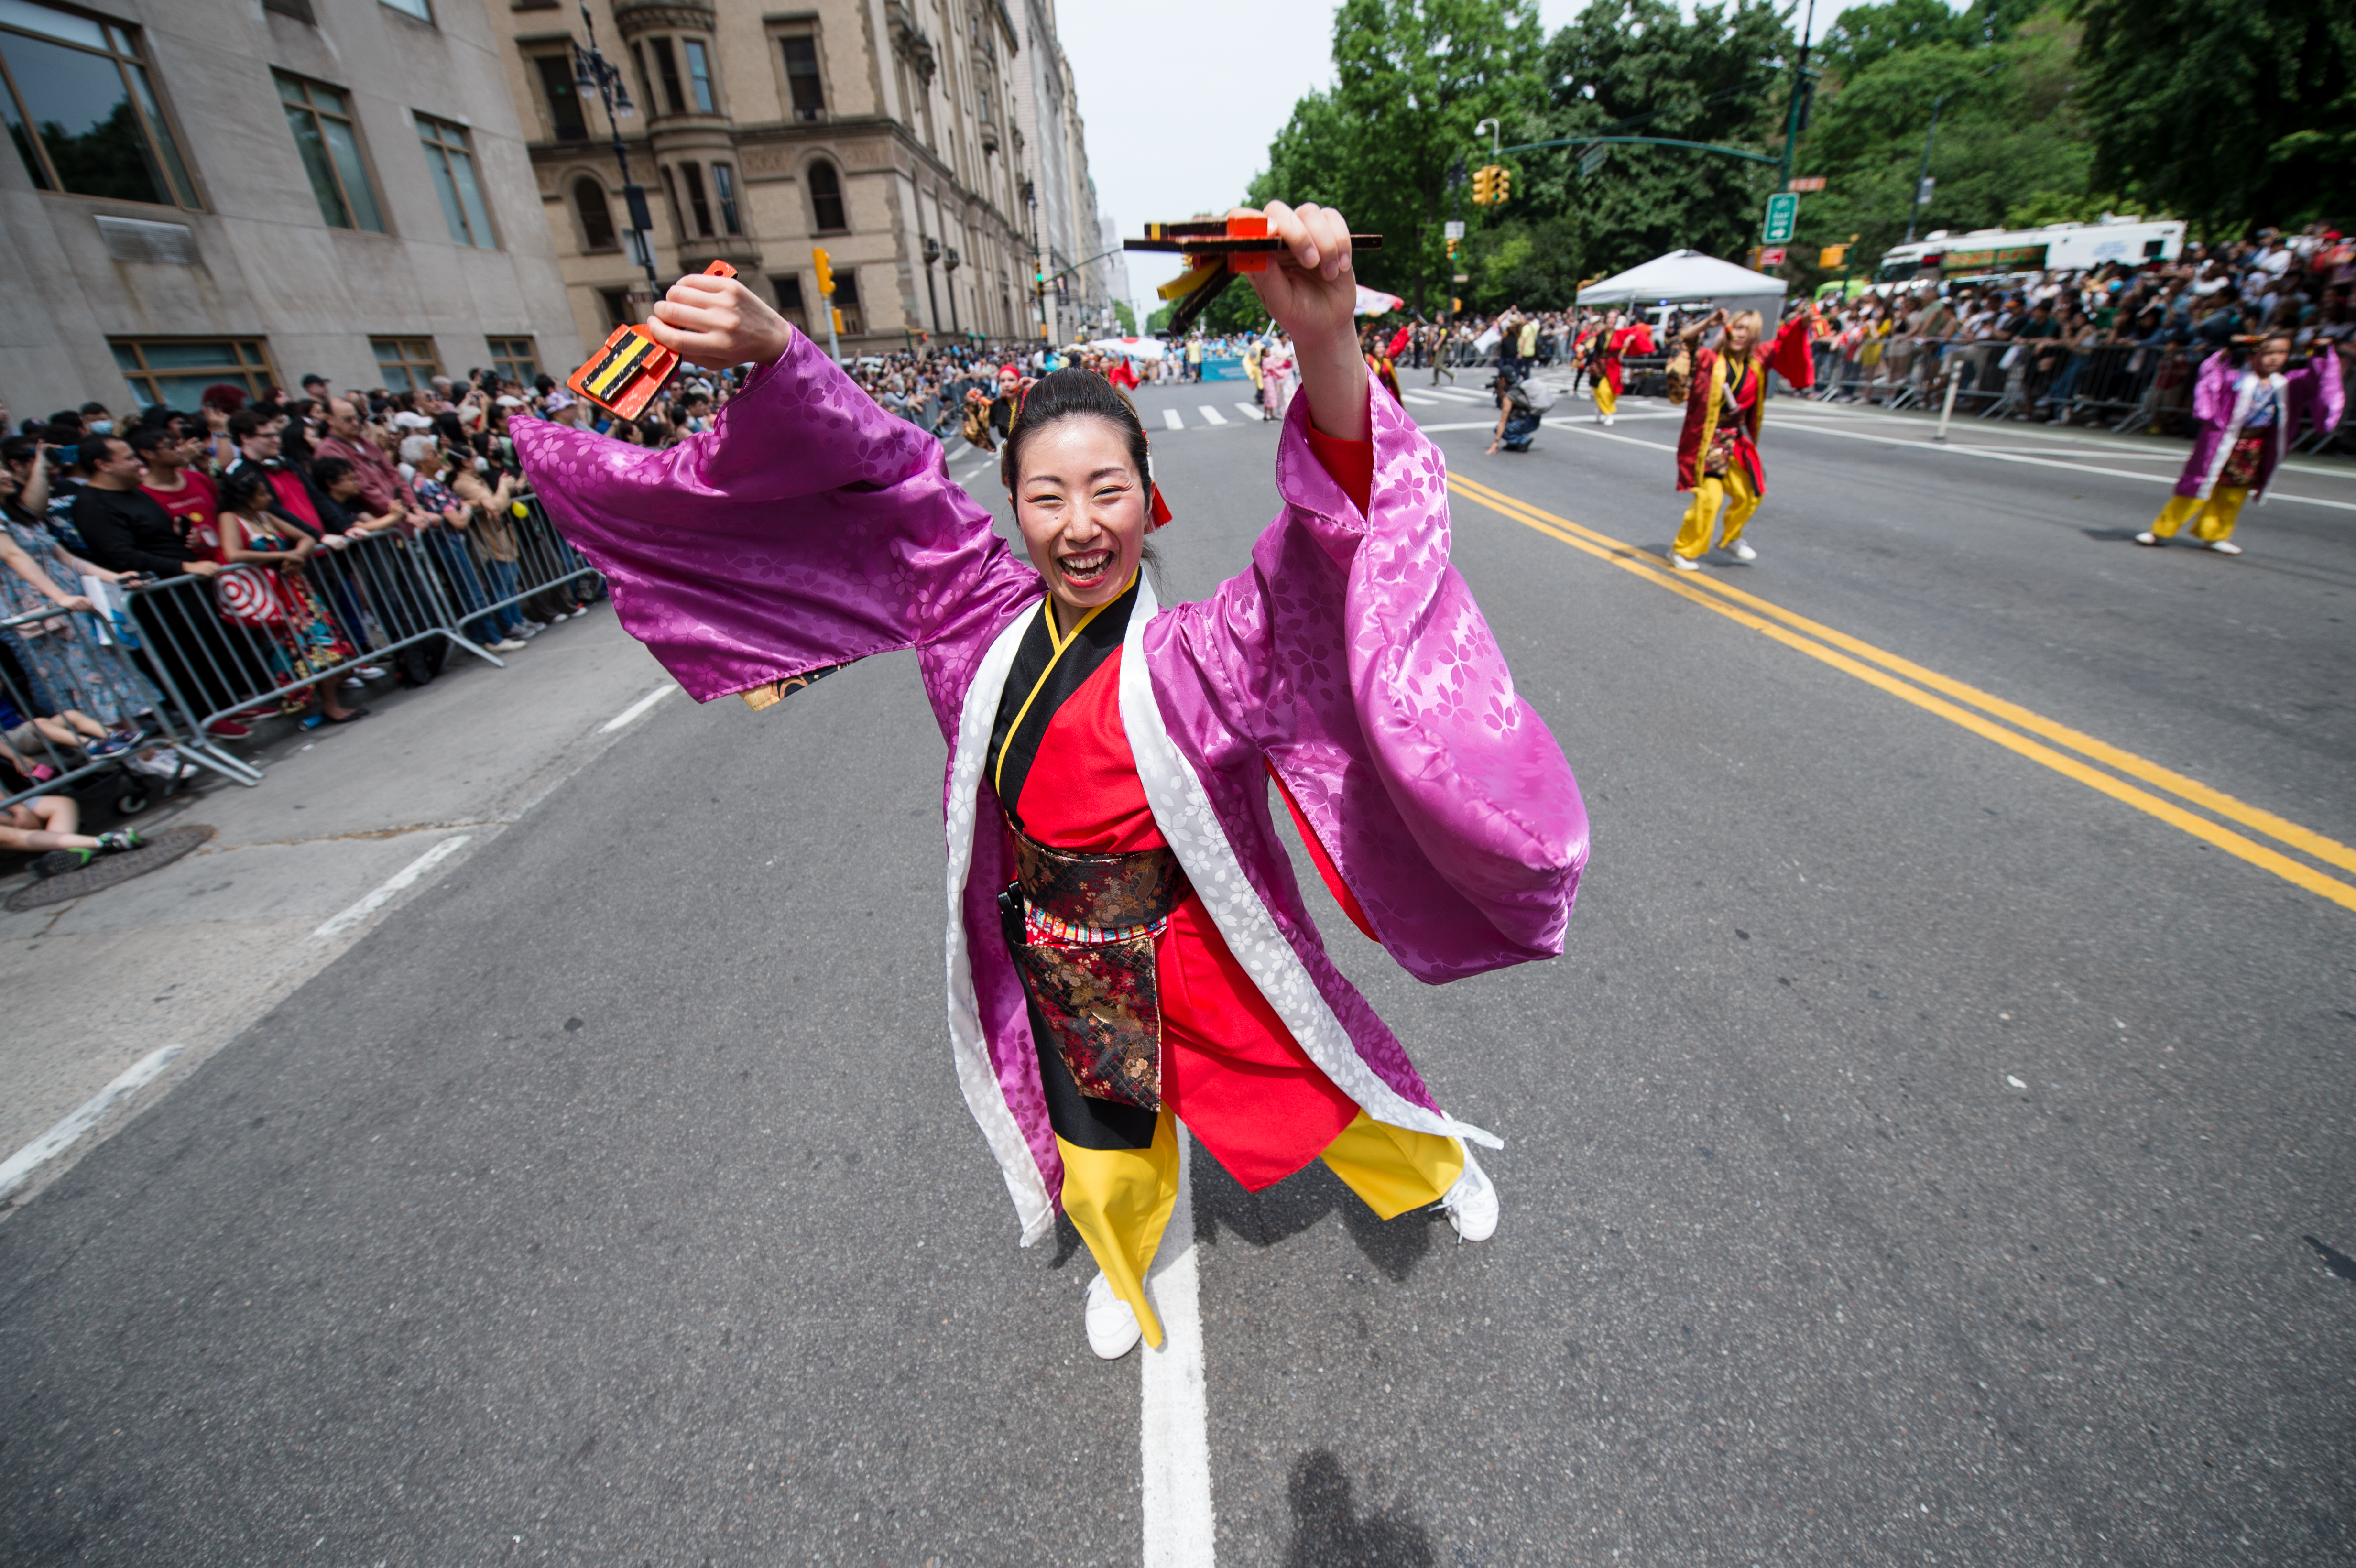 a woman wearing purple dances down a street for a parade.